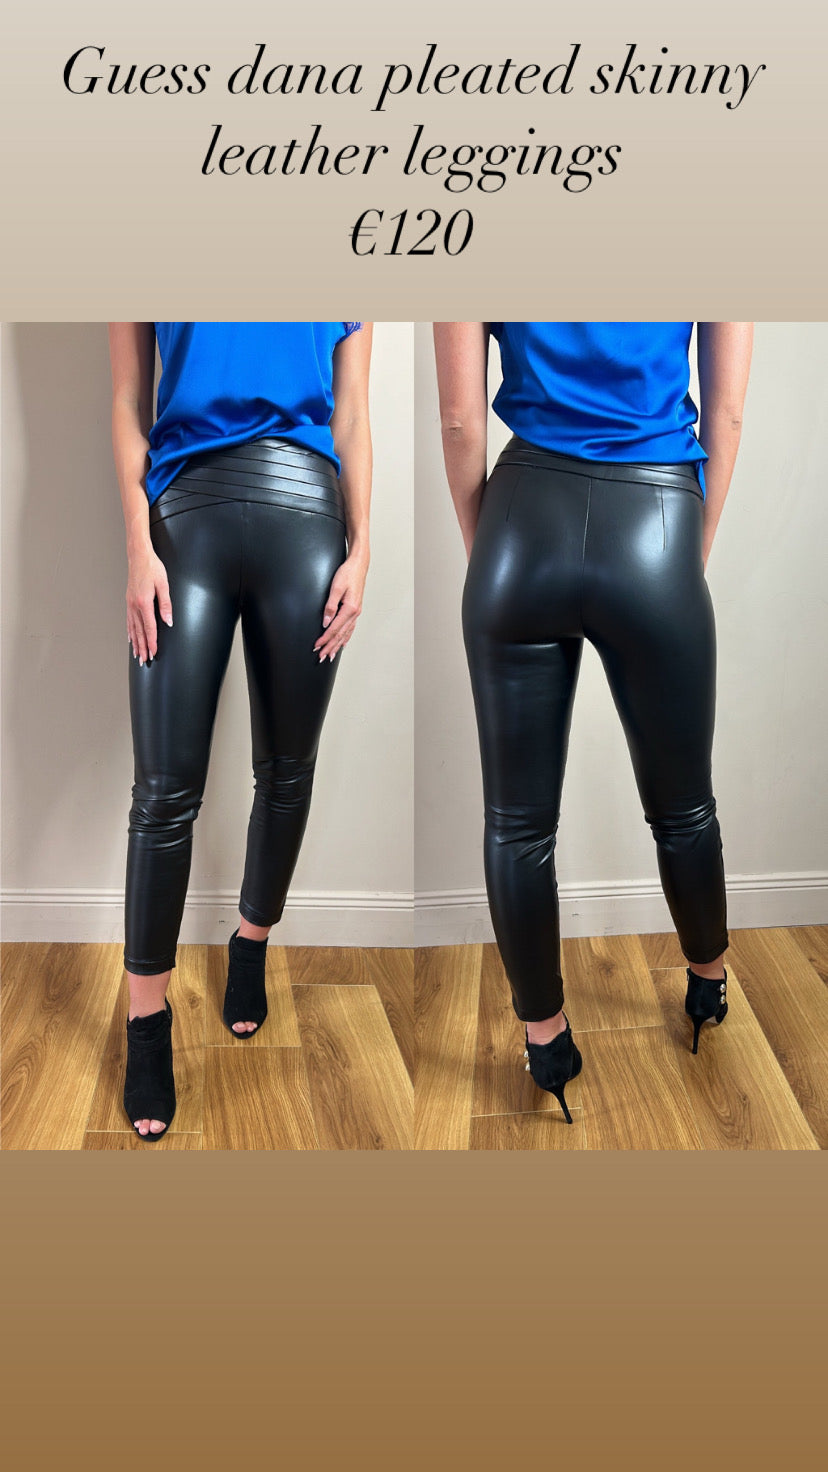 Guess dana pleated skinny leather leggings — Therapy Boutique